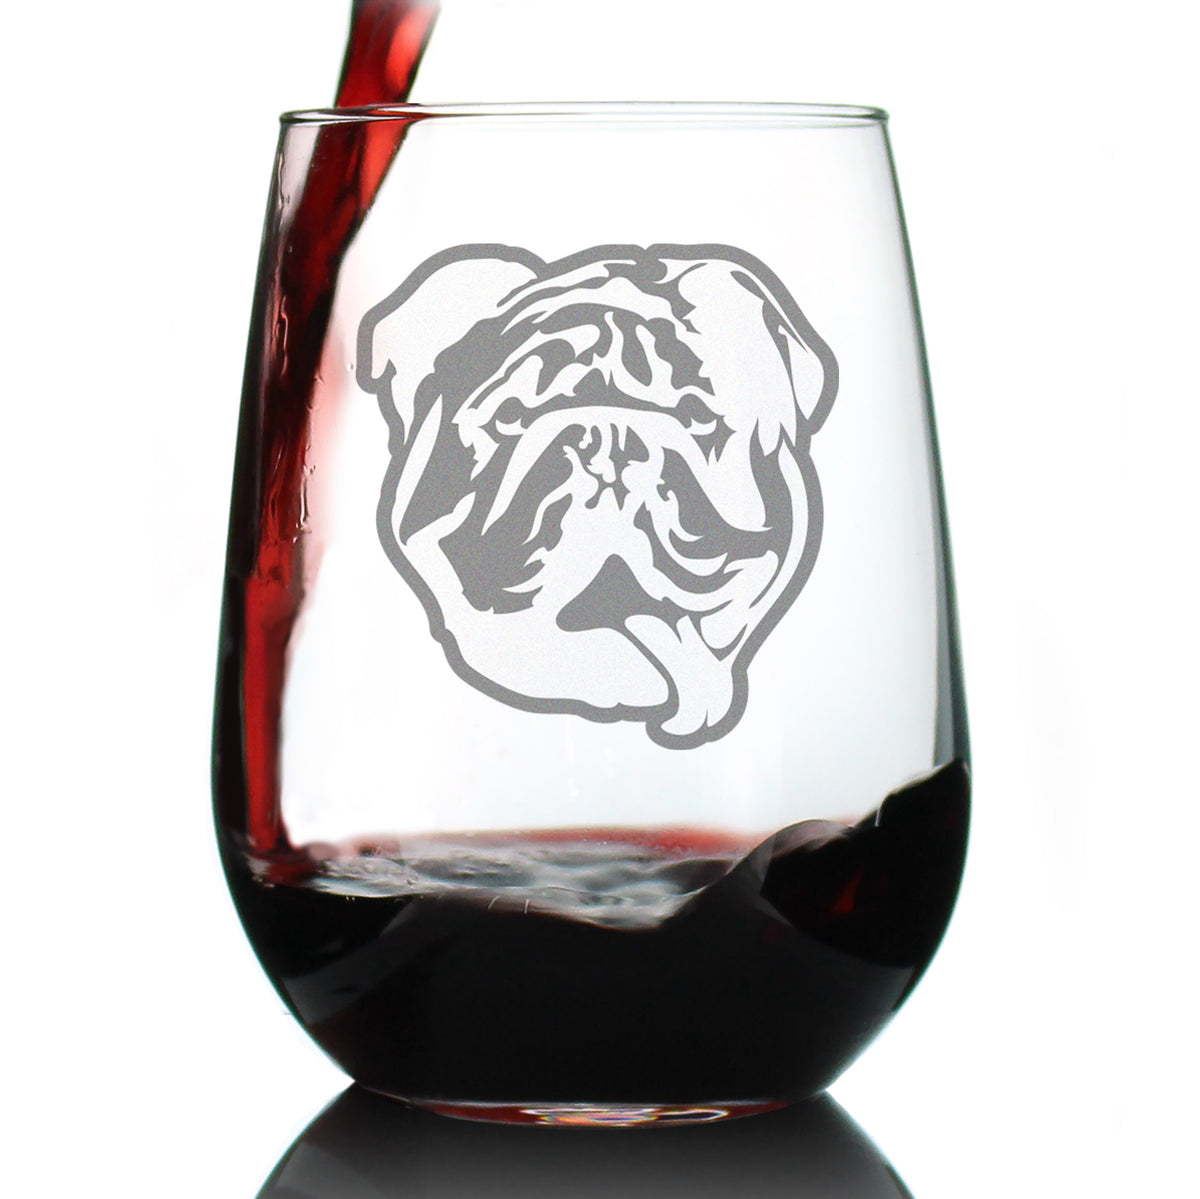 Bulldog Stemless Wine Glass - Large Glasses - Cute Gifts for Dog Lovers with English Bulldogs